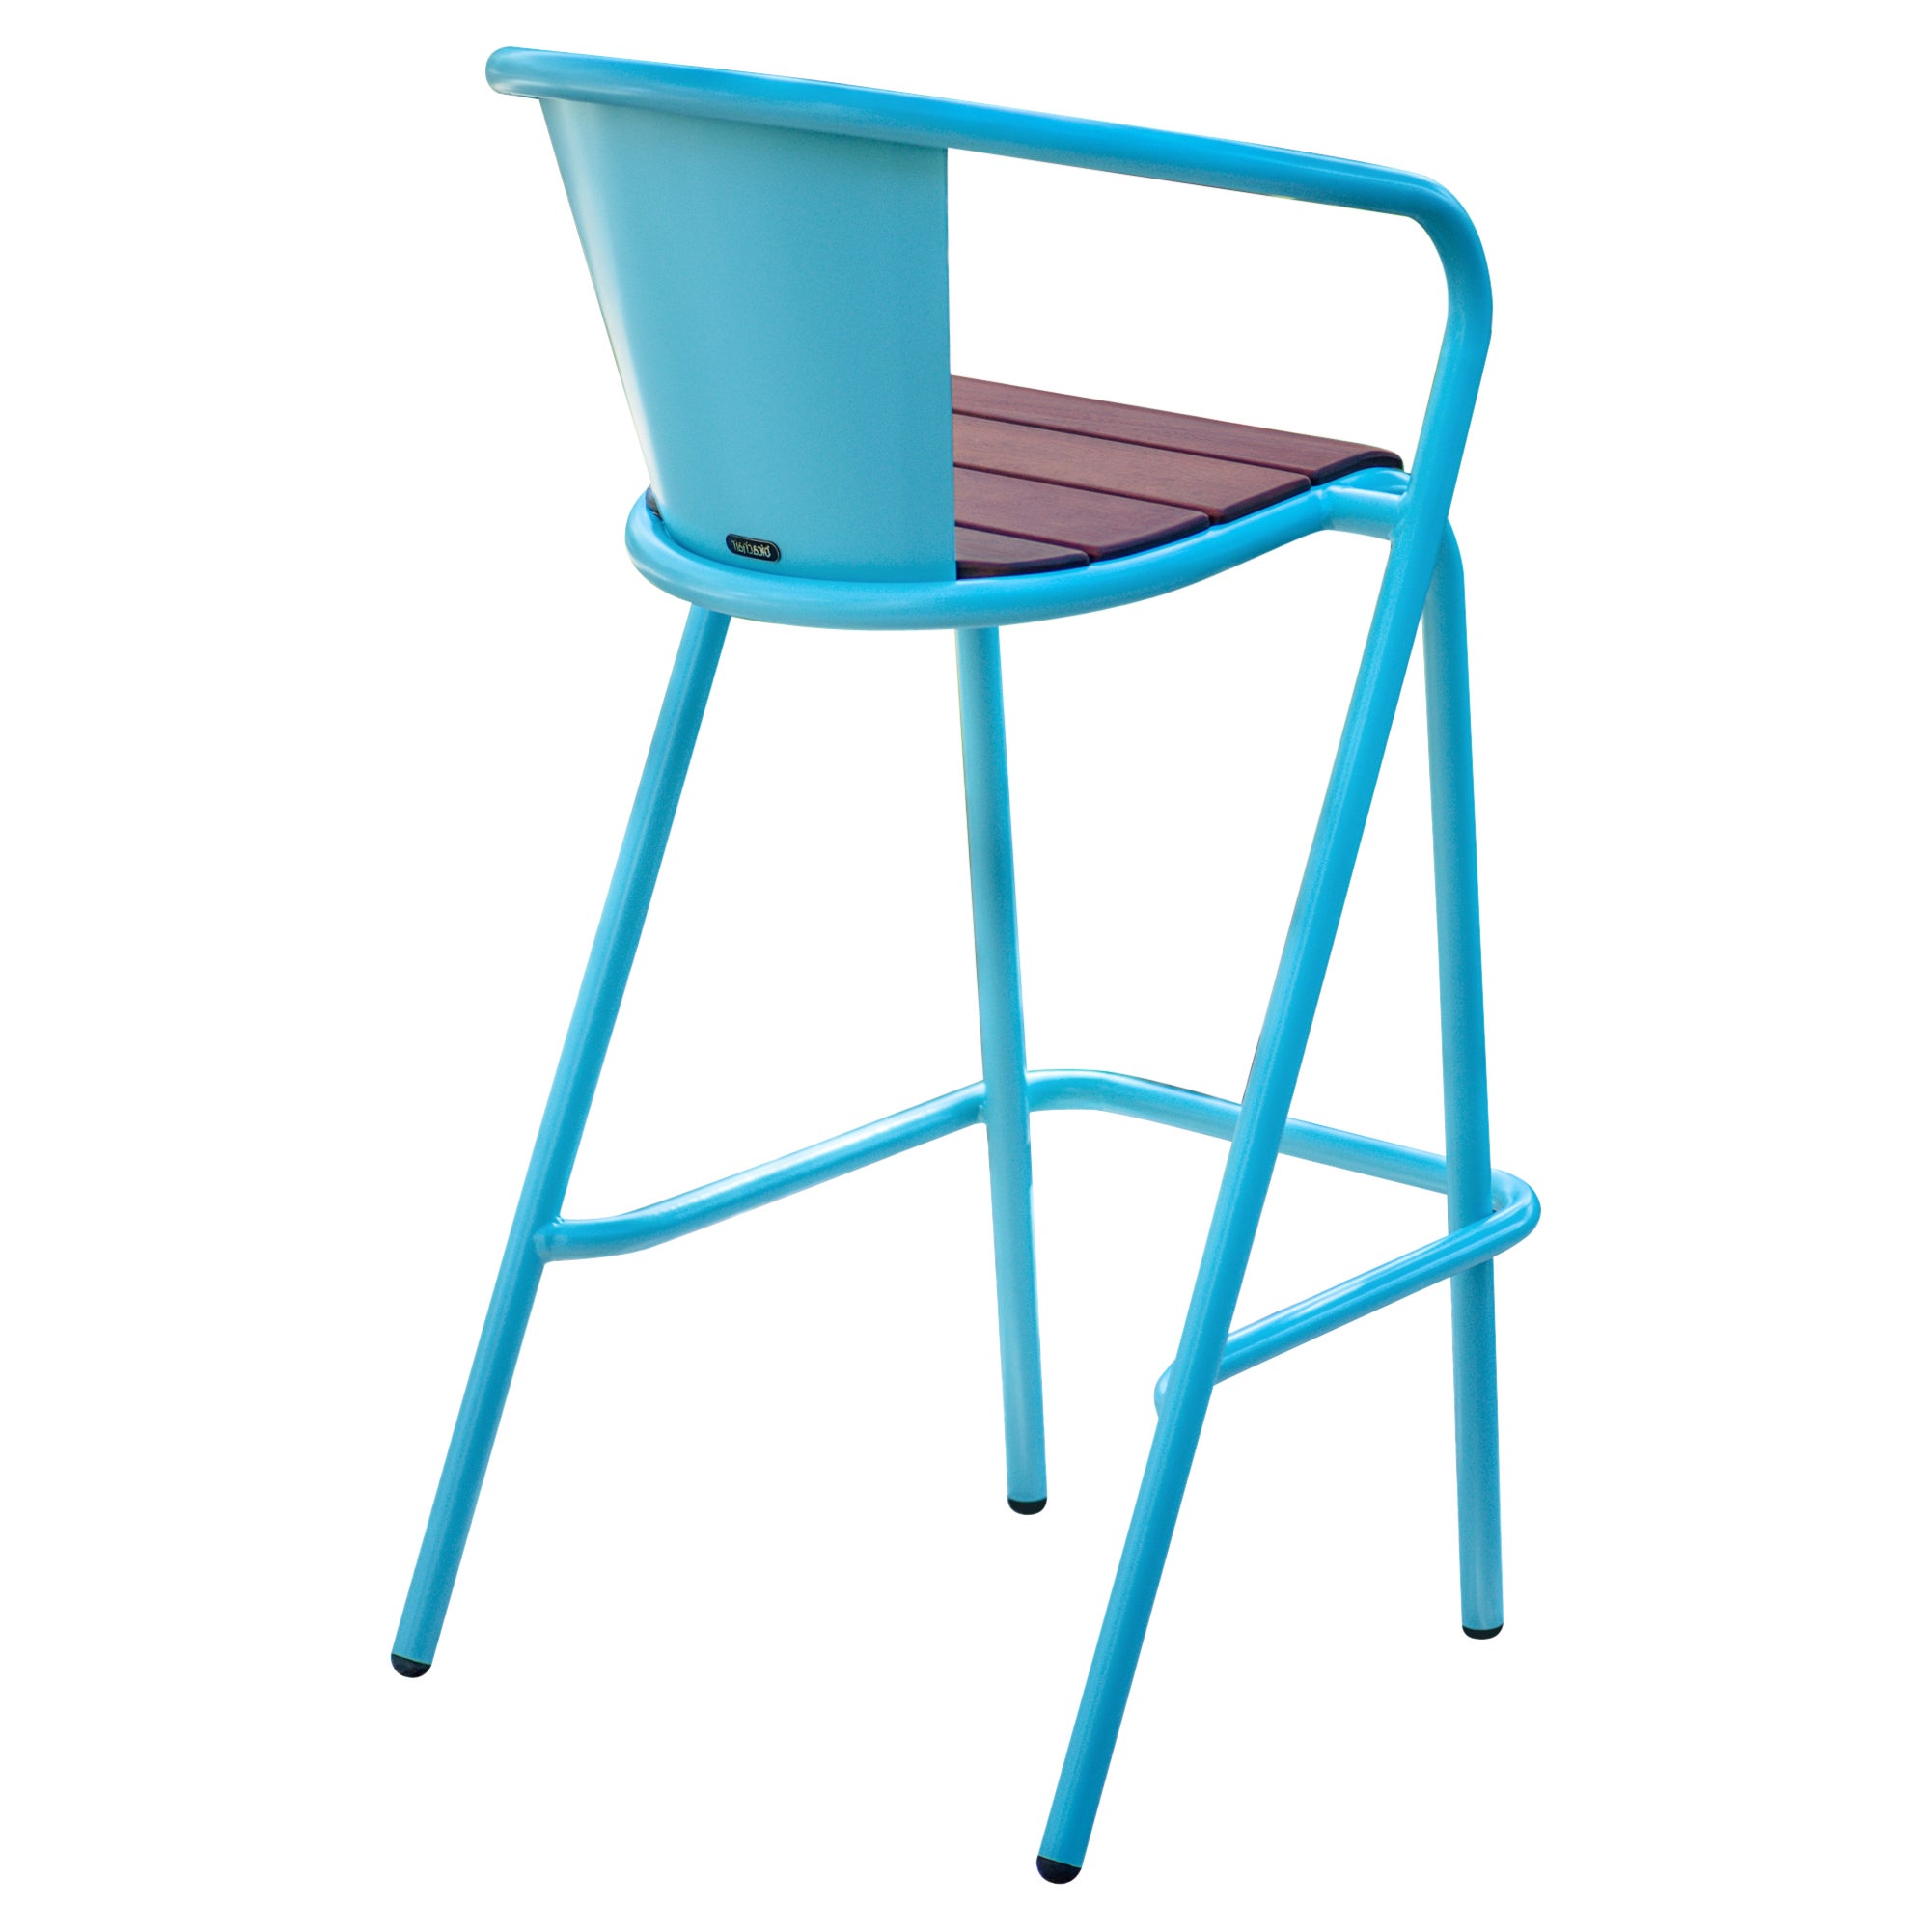 BICAstool Modern Outdoor Steel High Stool Chair Turquoise with Ipê Wood Slabs For Sale